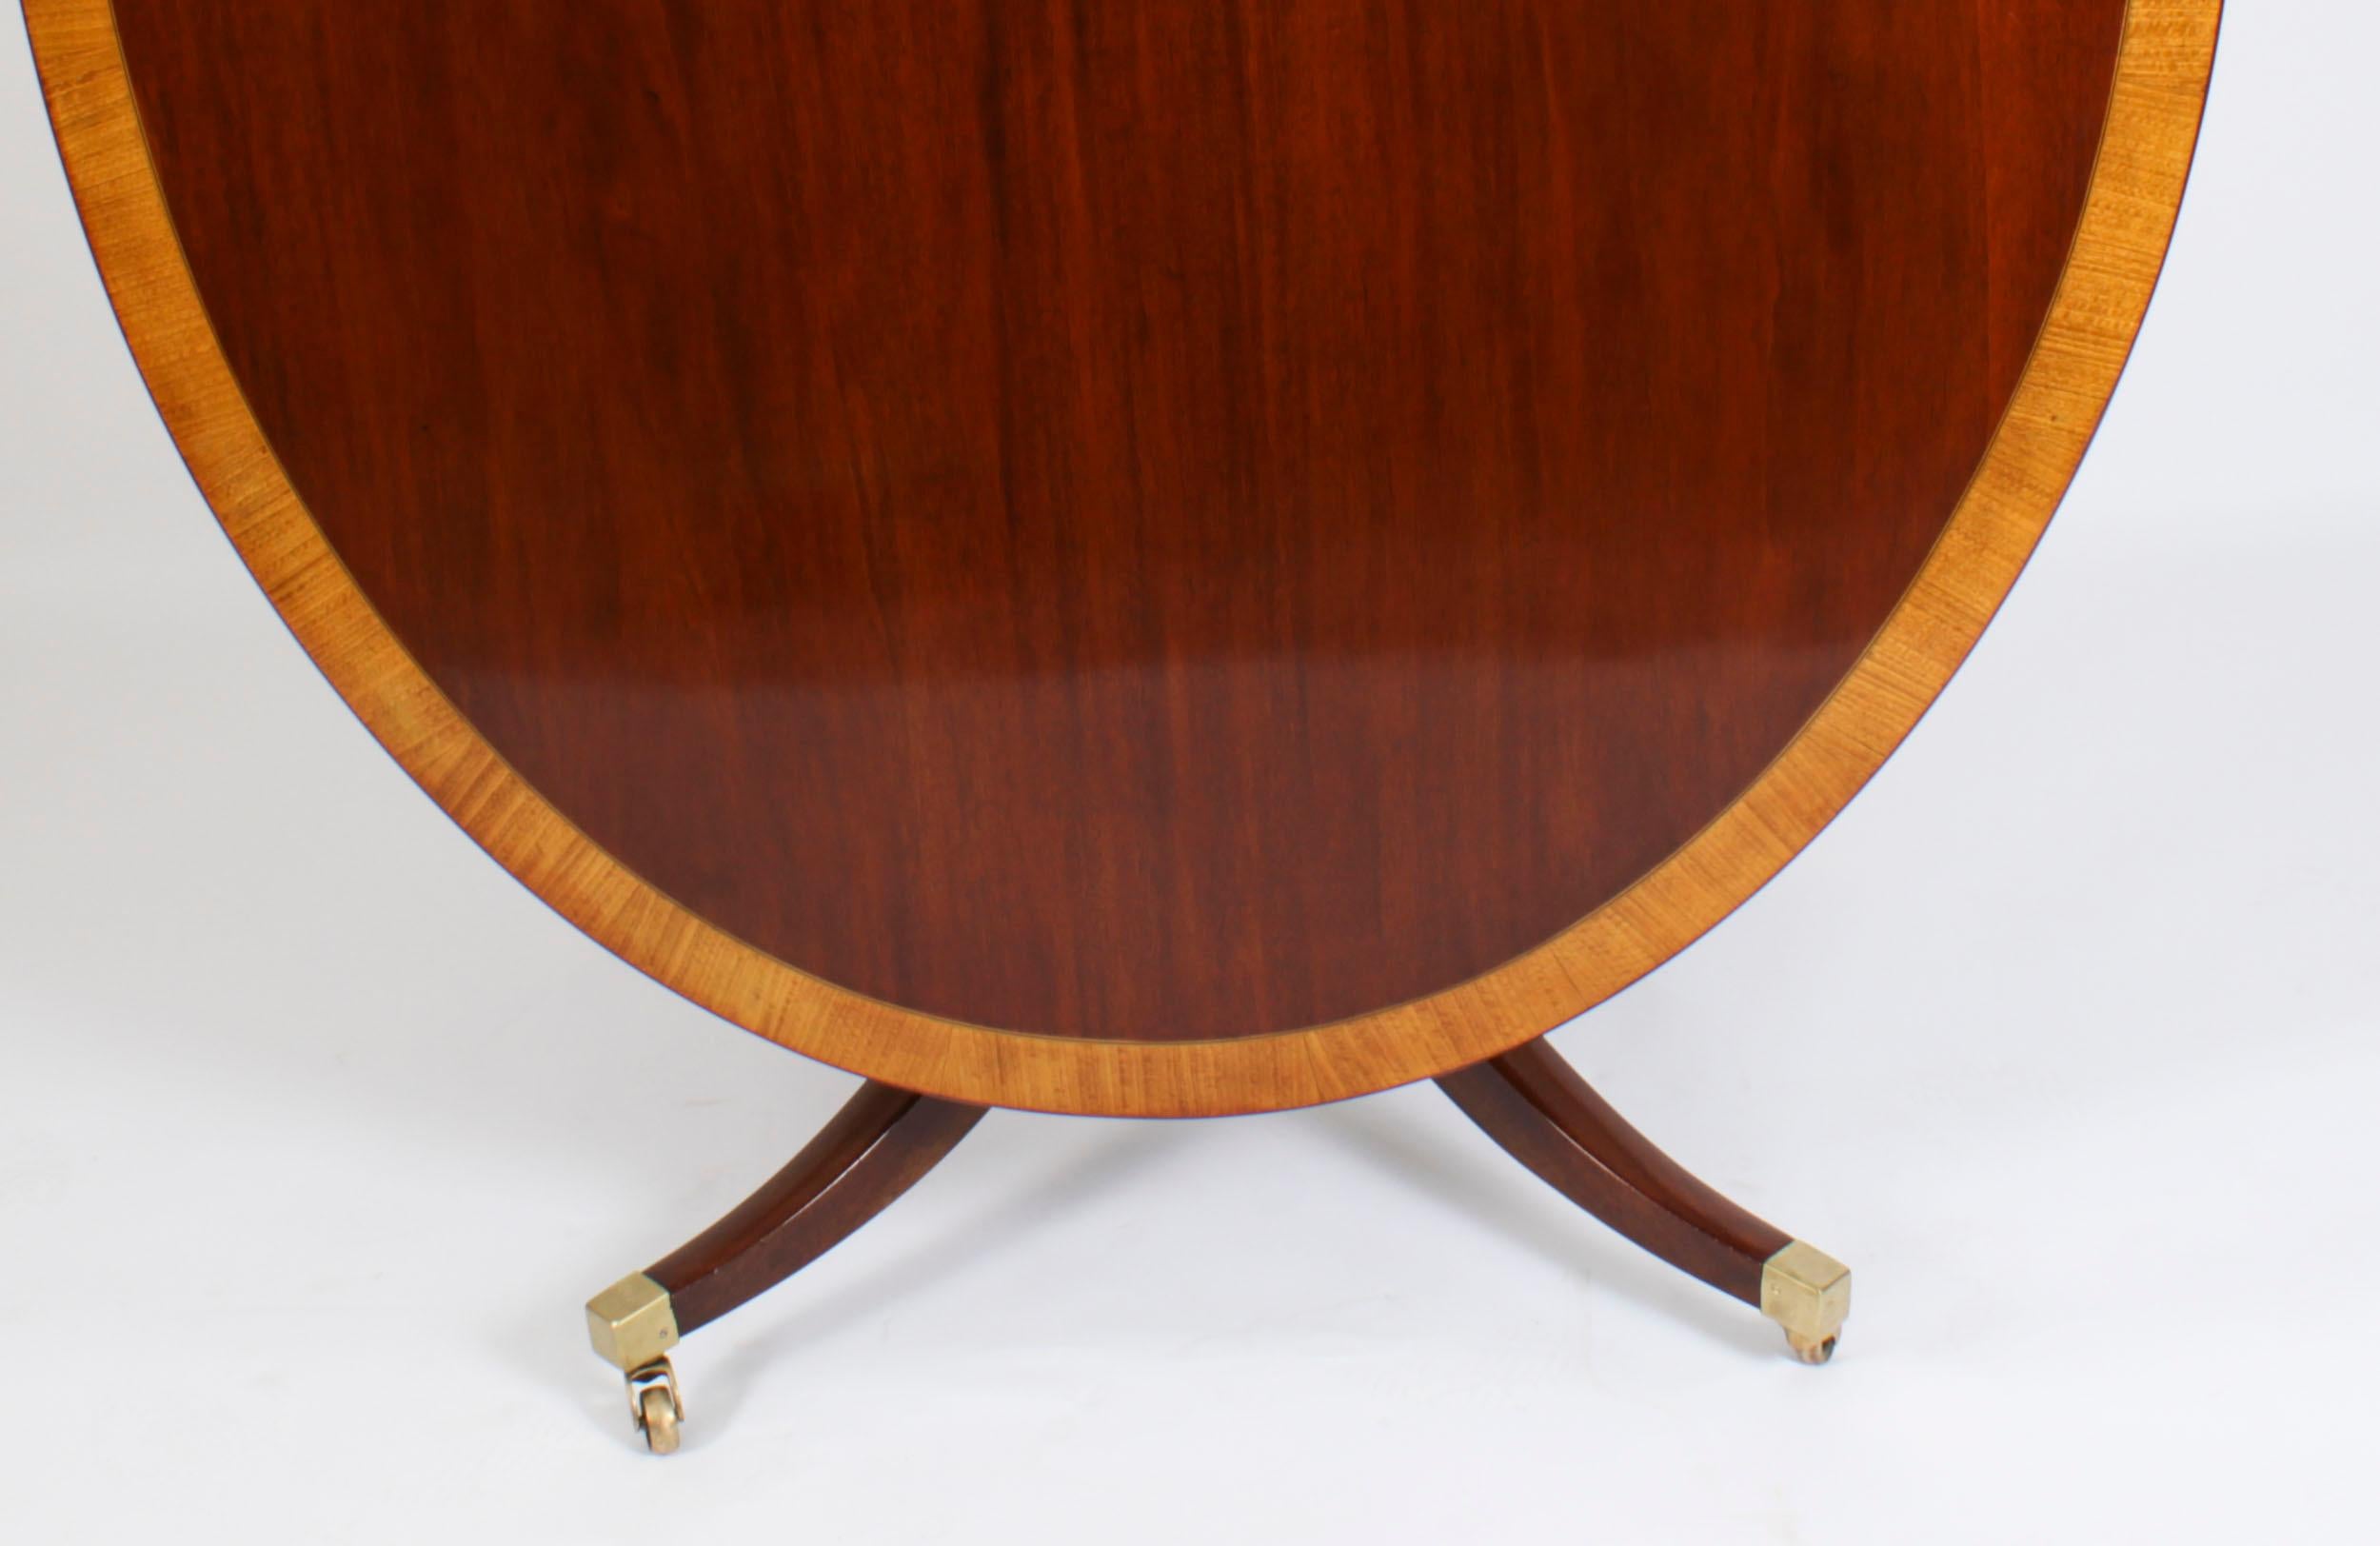 Antique Oval Mahogany Tilt Top Dining Table, Early 20th Century For Sale 1